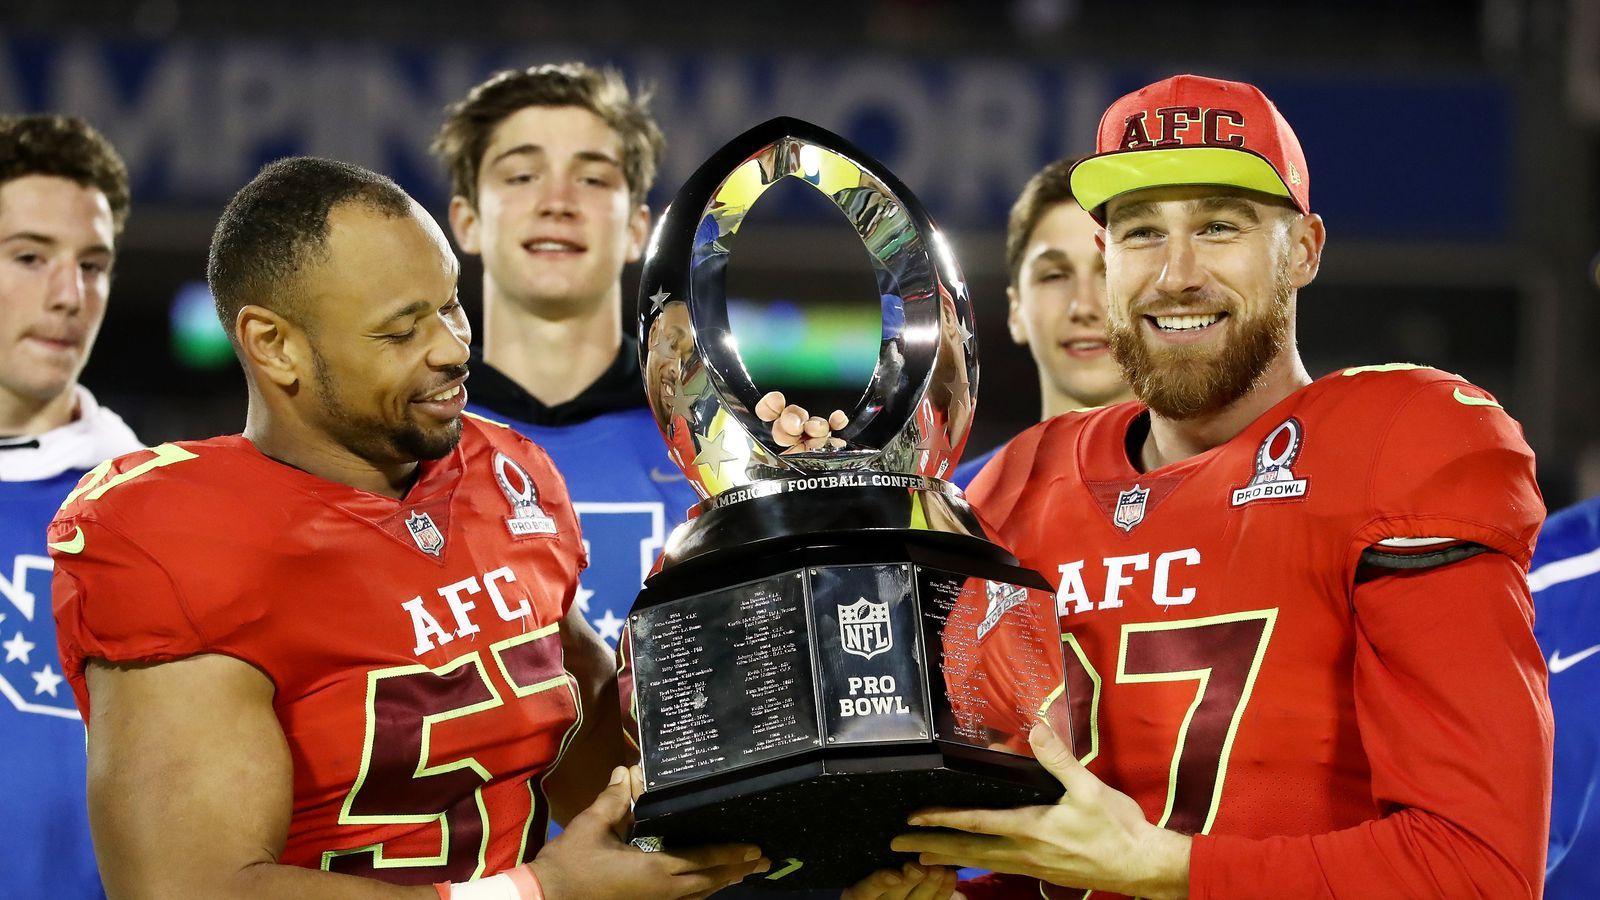 Pro Bowl will return to Orlando in 2018 and keep everything that